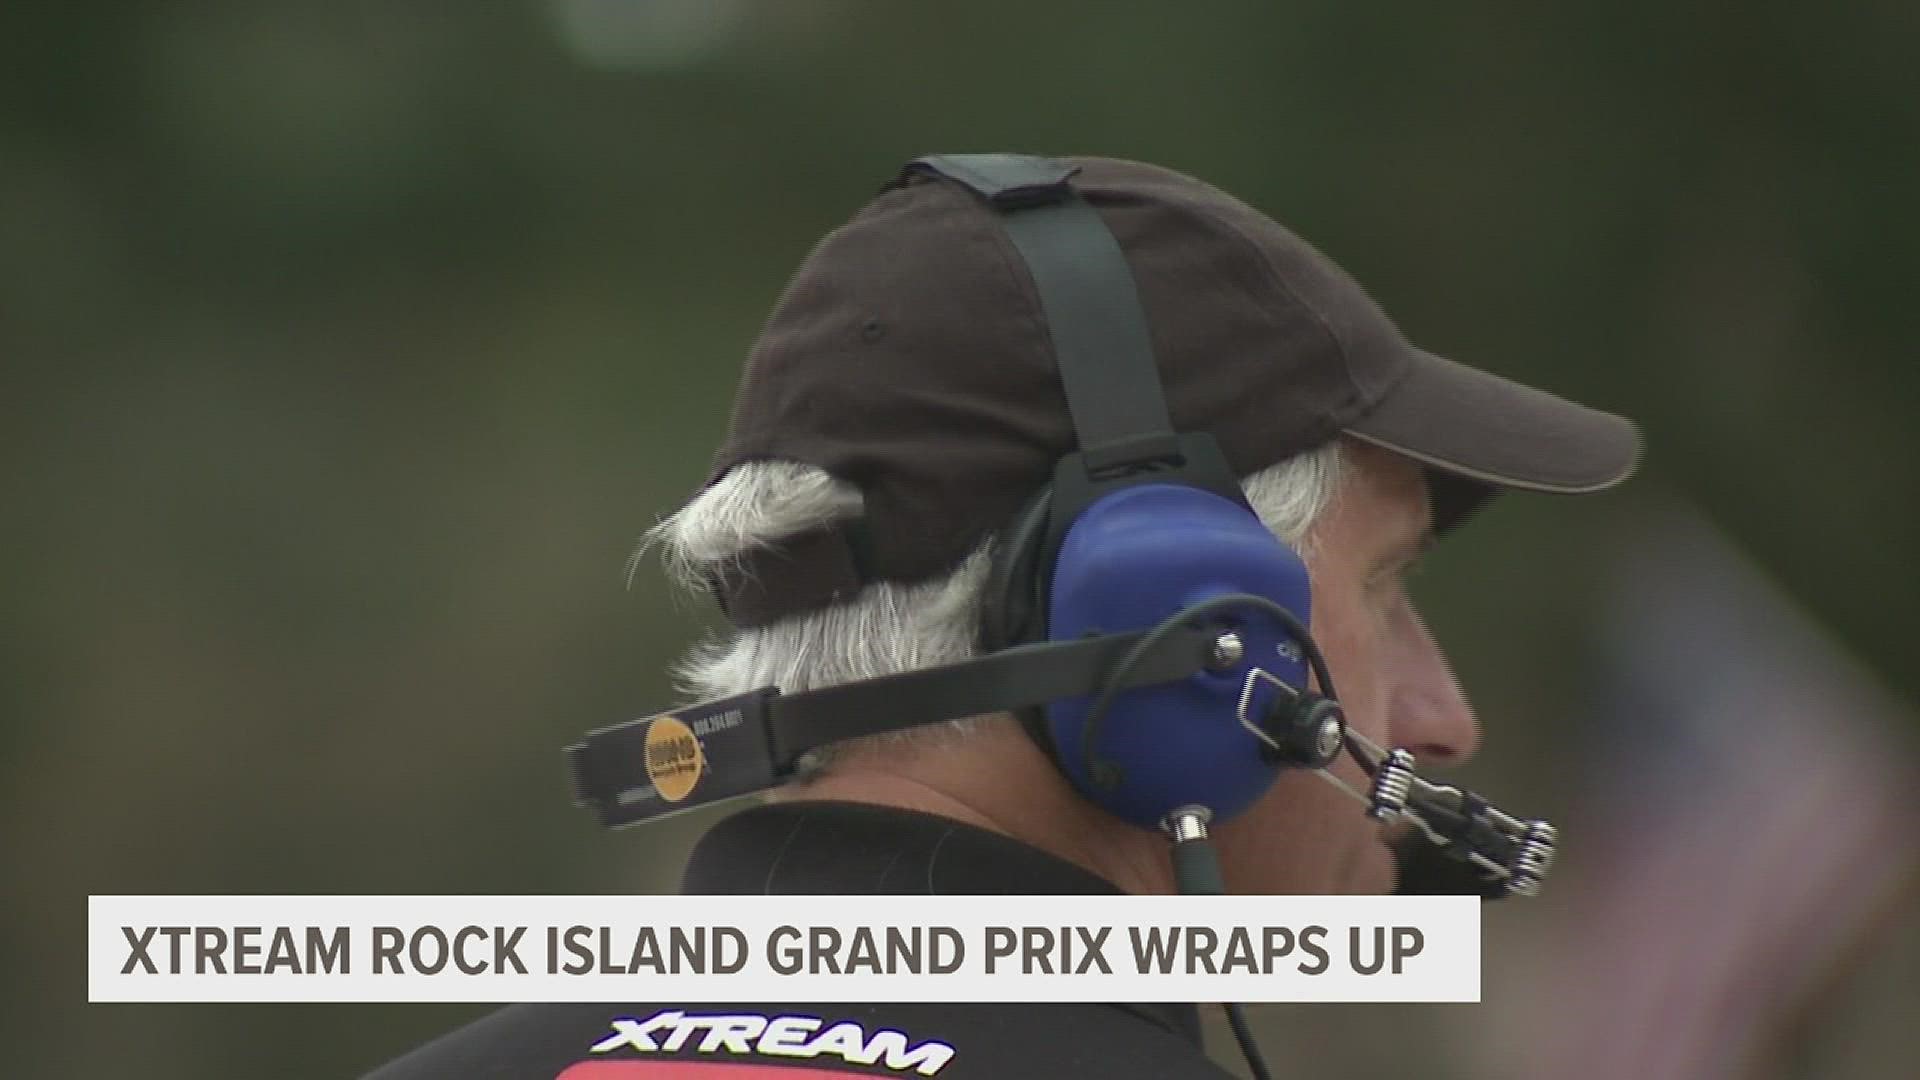 More than 200 drivers gathered in Rock Island for the 27th Xtream Grand Prix. It is considered to be one of the largest street racing events in North America.